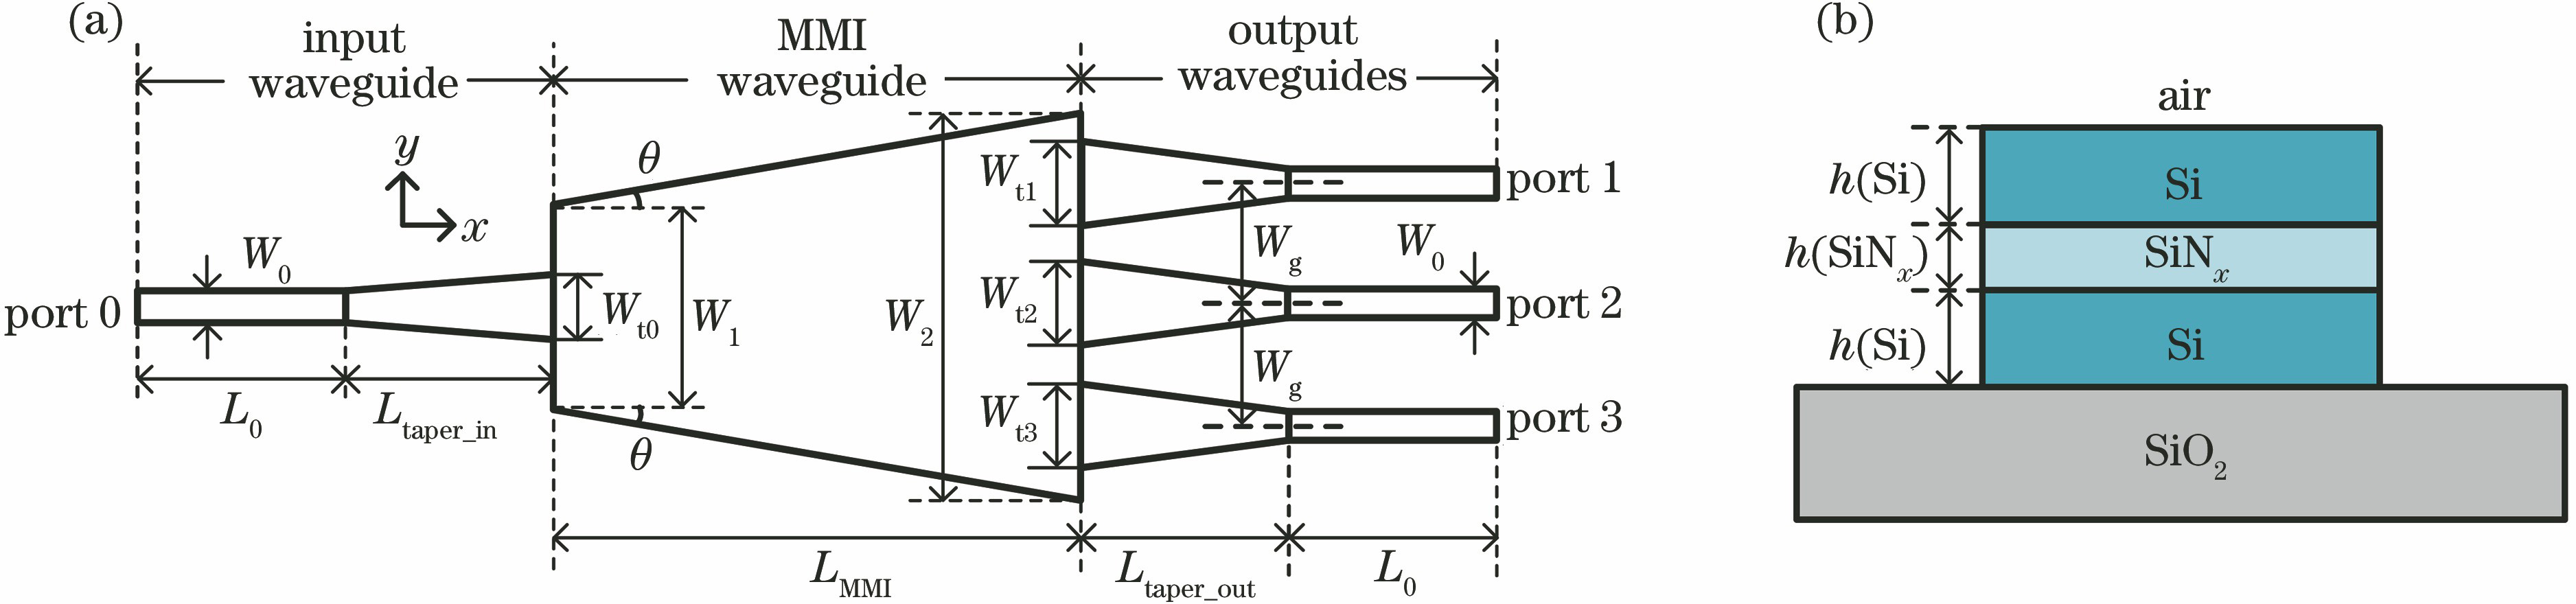 Schematic configuration of the optical power splitter structure. (a) Top view; (b) Cross section of the waveguide